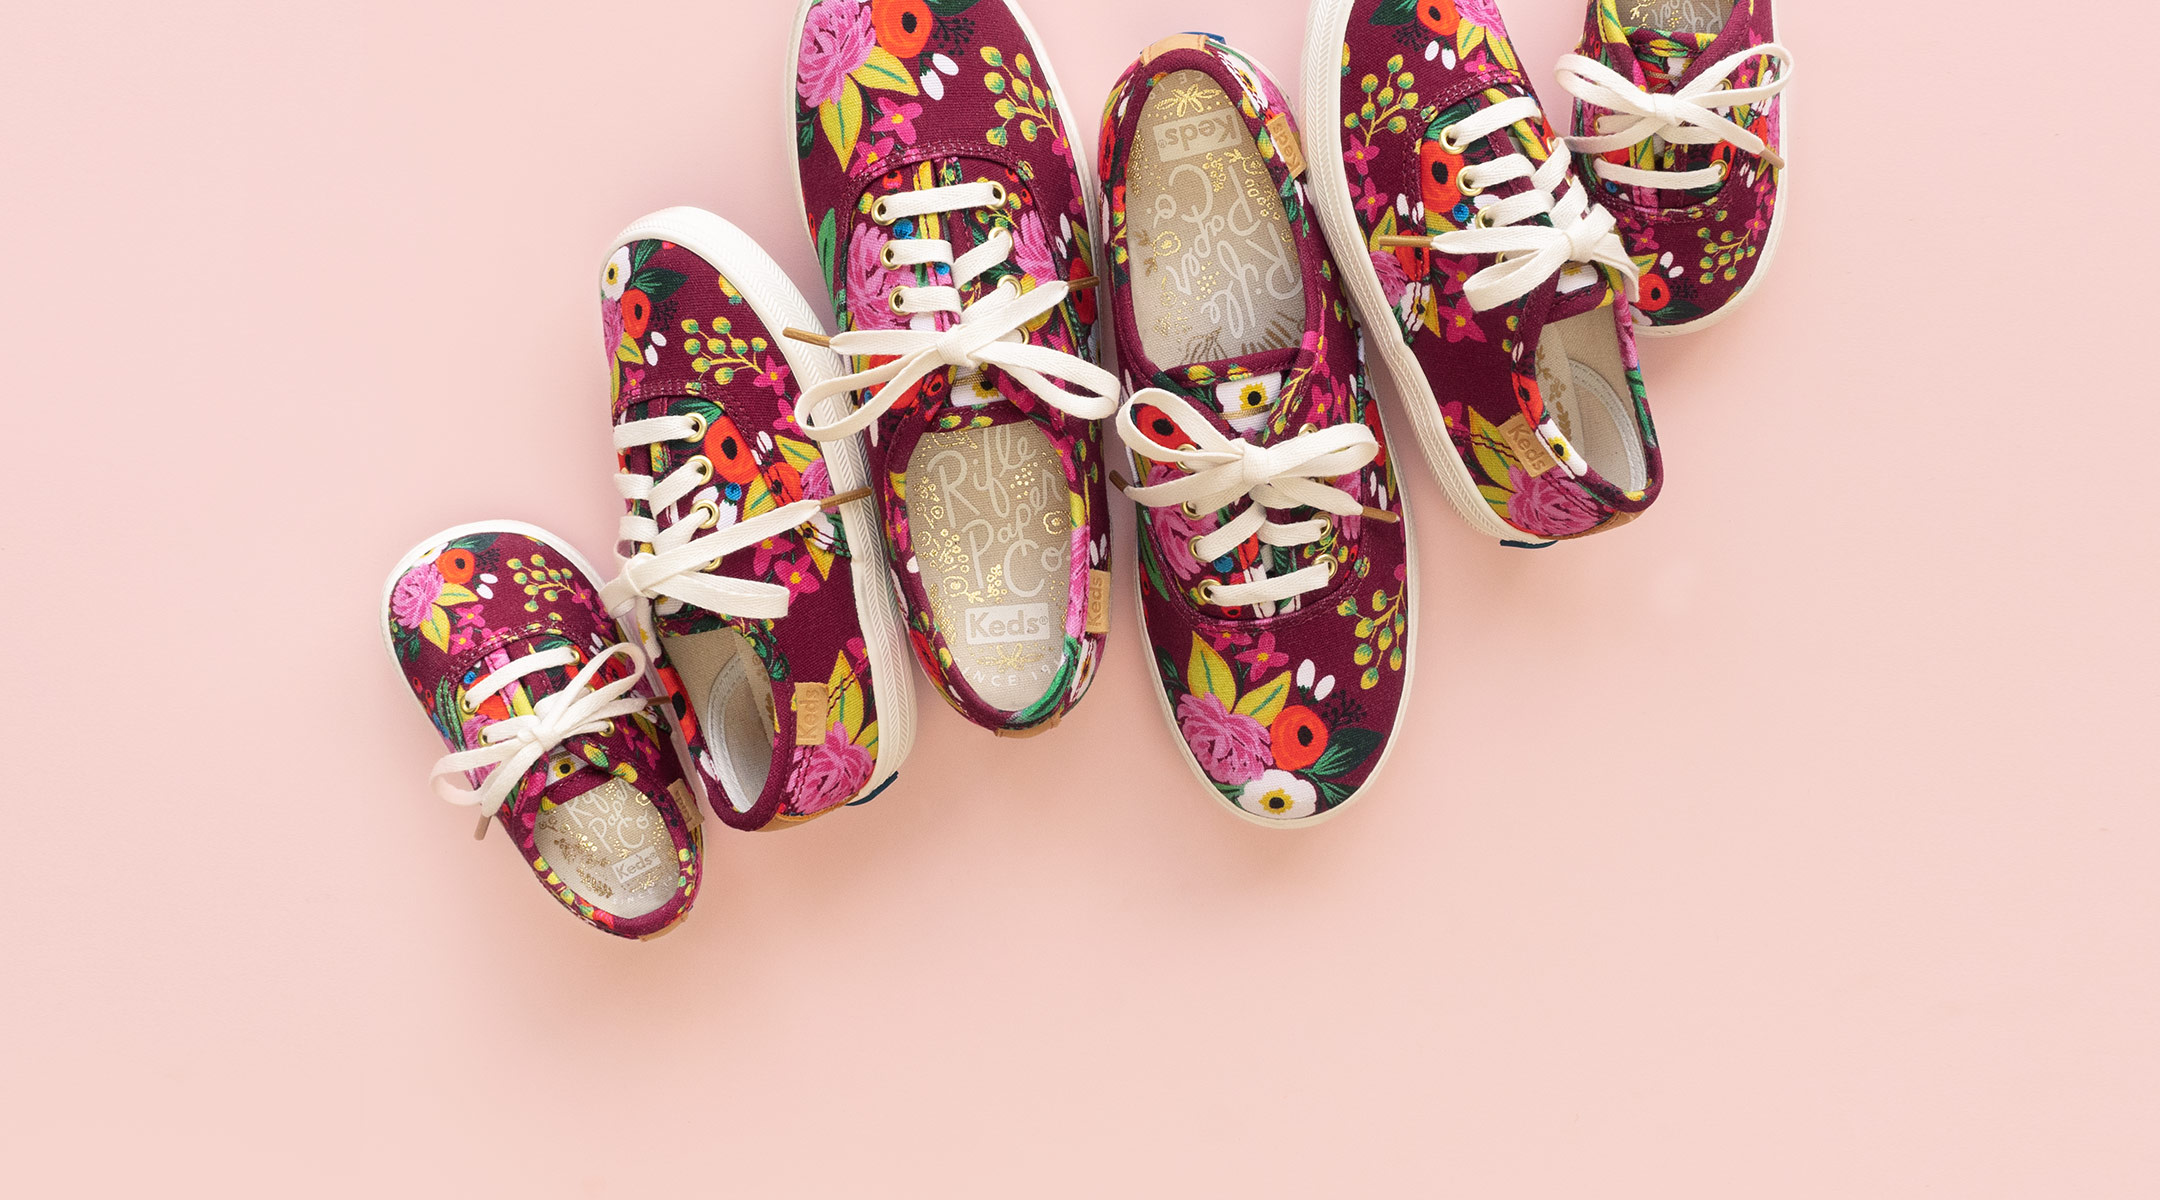 sneaker shoe collaboration between keds and rifle paper co.